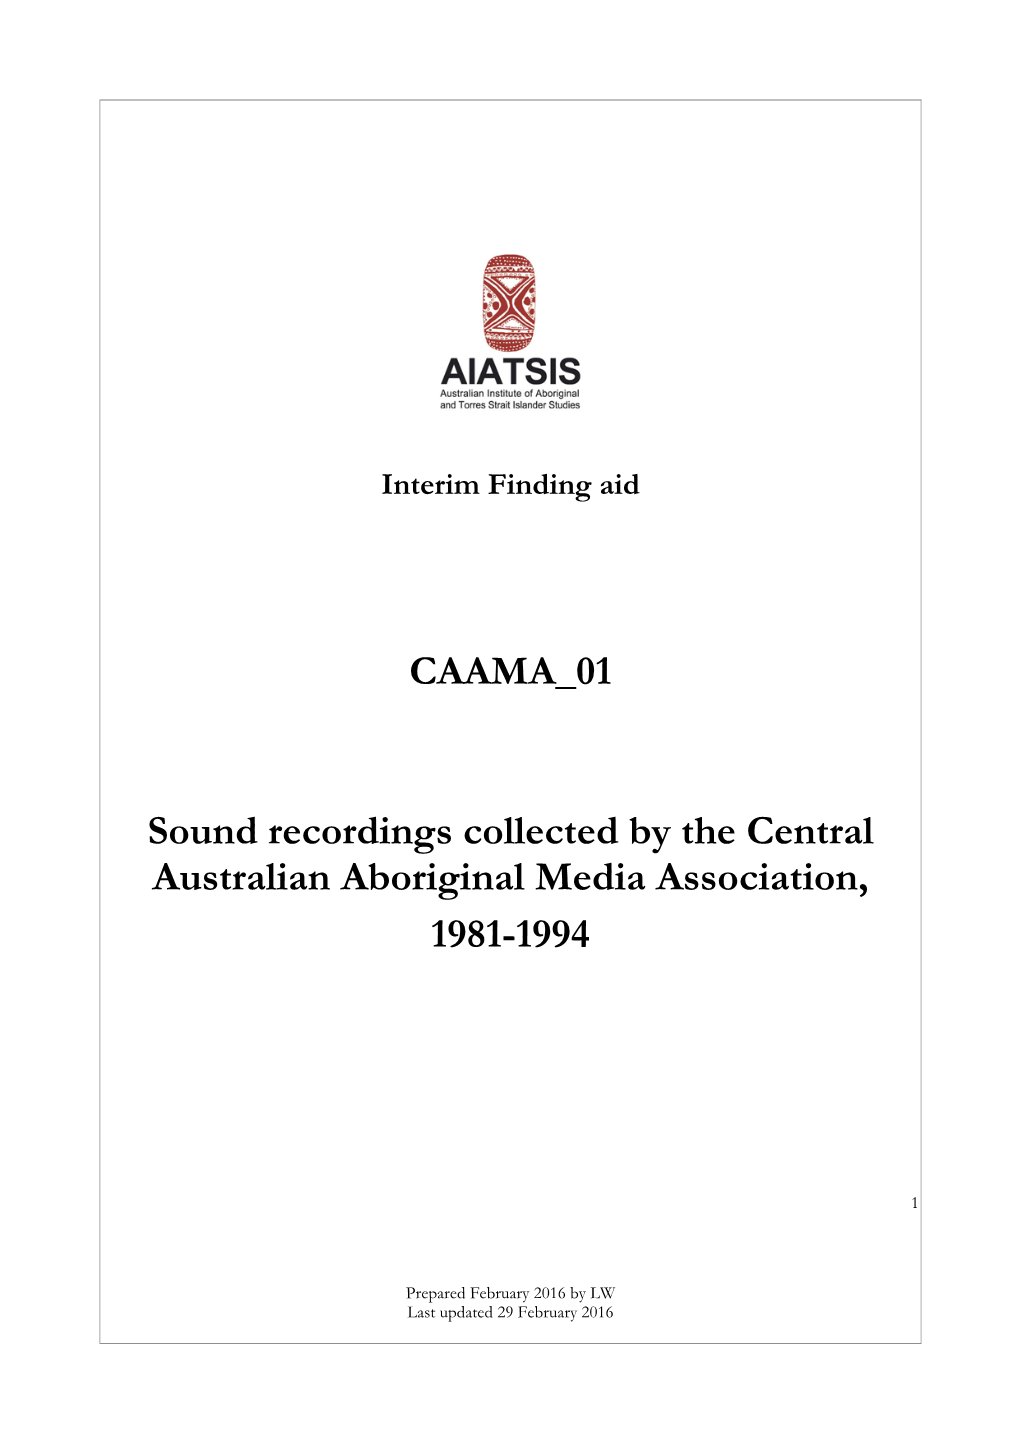 CAAMA 01 Sound Recordings Collected by the Central Australian